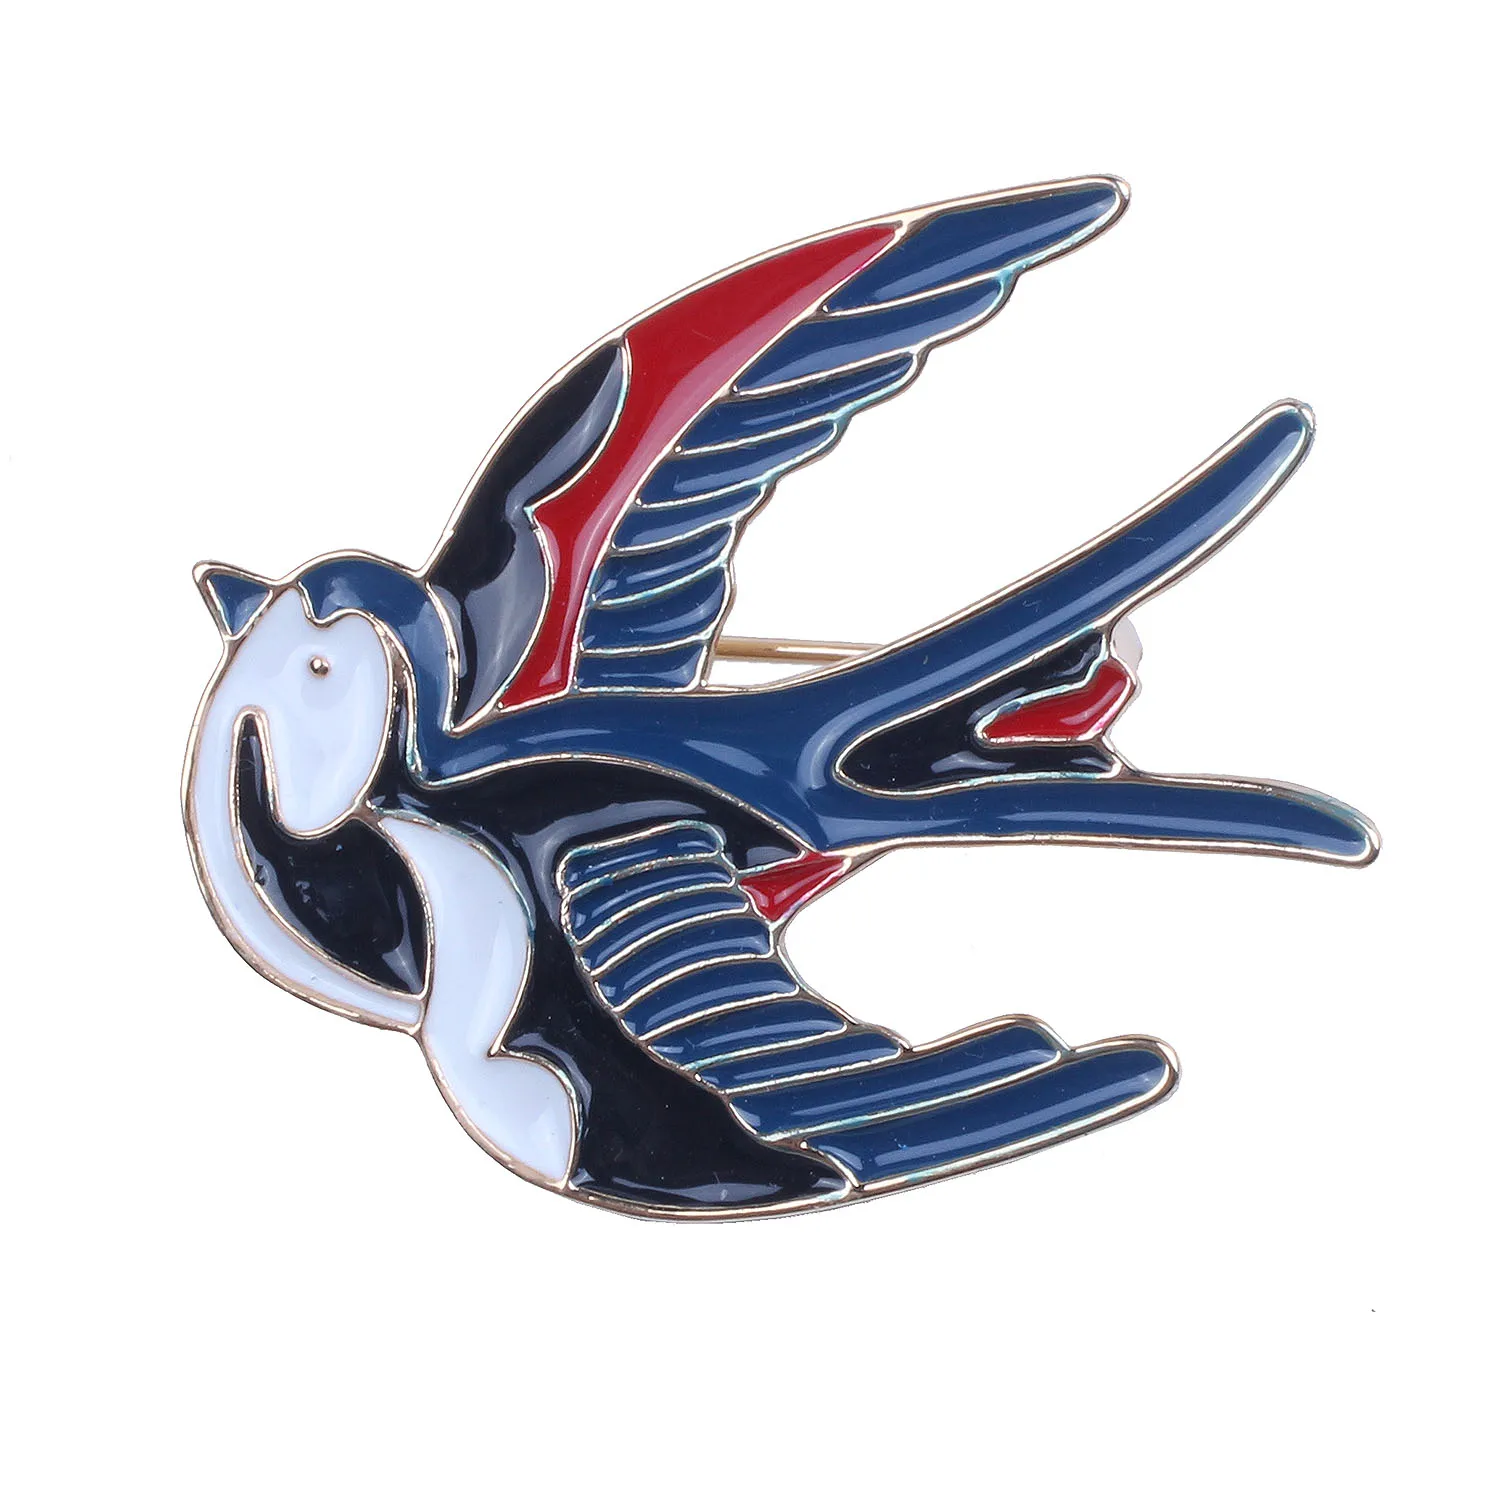 Cute Blue Bird Enamel Swallow Brooches Hijab Pins Up Zinc alloy Corsage Designer Wedding Shoulder Scarf Dresses Clips For Wome